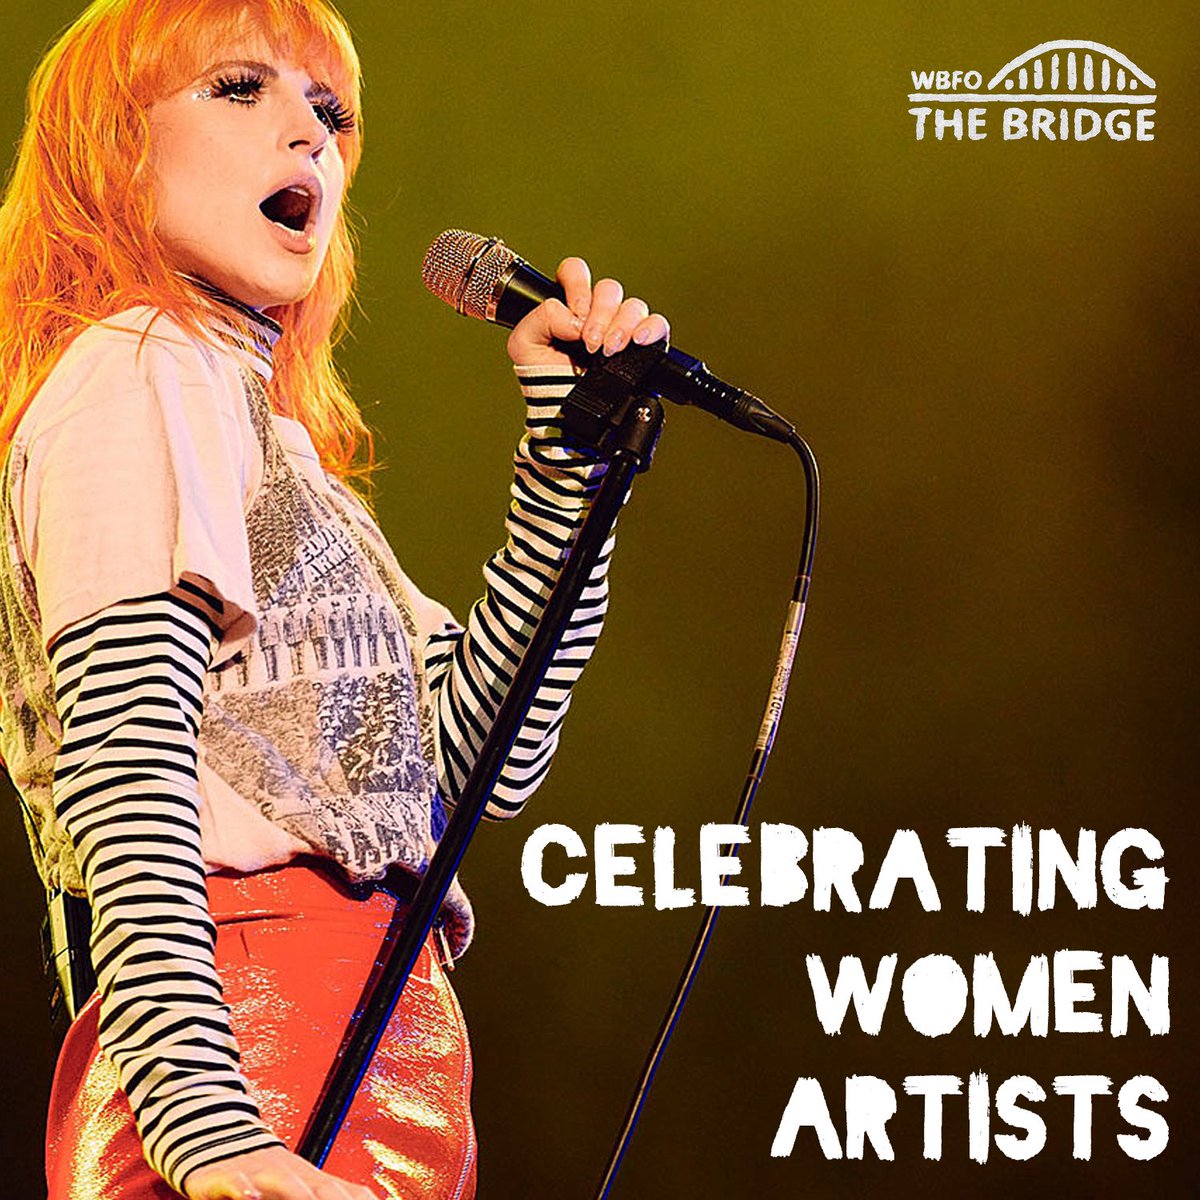 Our Women’s History Month tribute continues all weekend. 🎵 We are showcasing inspirational artists who have helped build our station's identity, including 
#Paramore, 
#AllisonRussell, 
#ArloParks, 
#GirlInRed, and so many more!